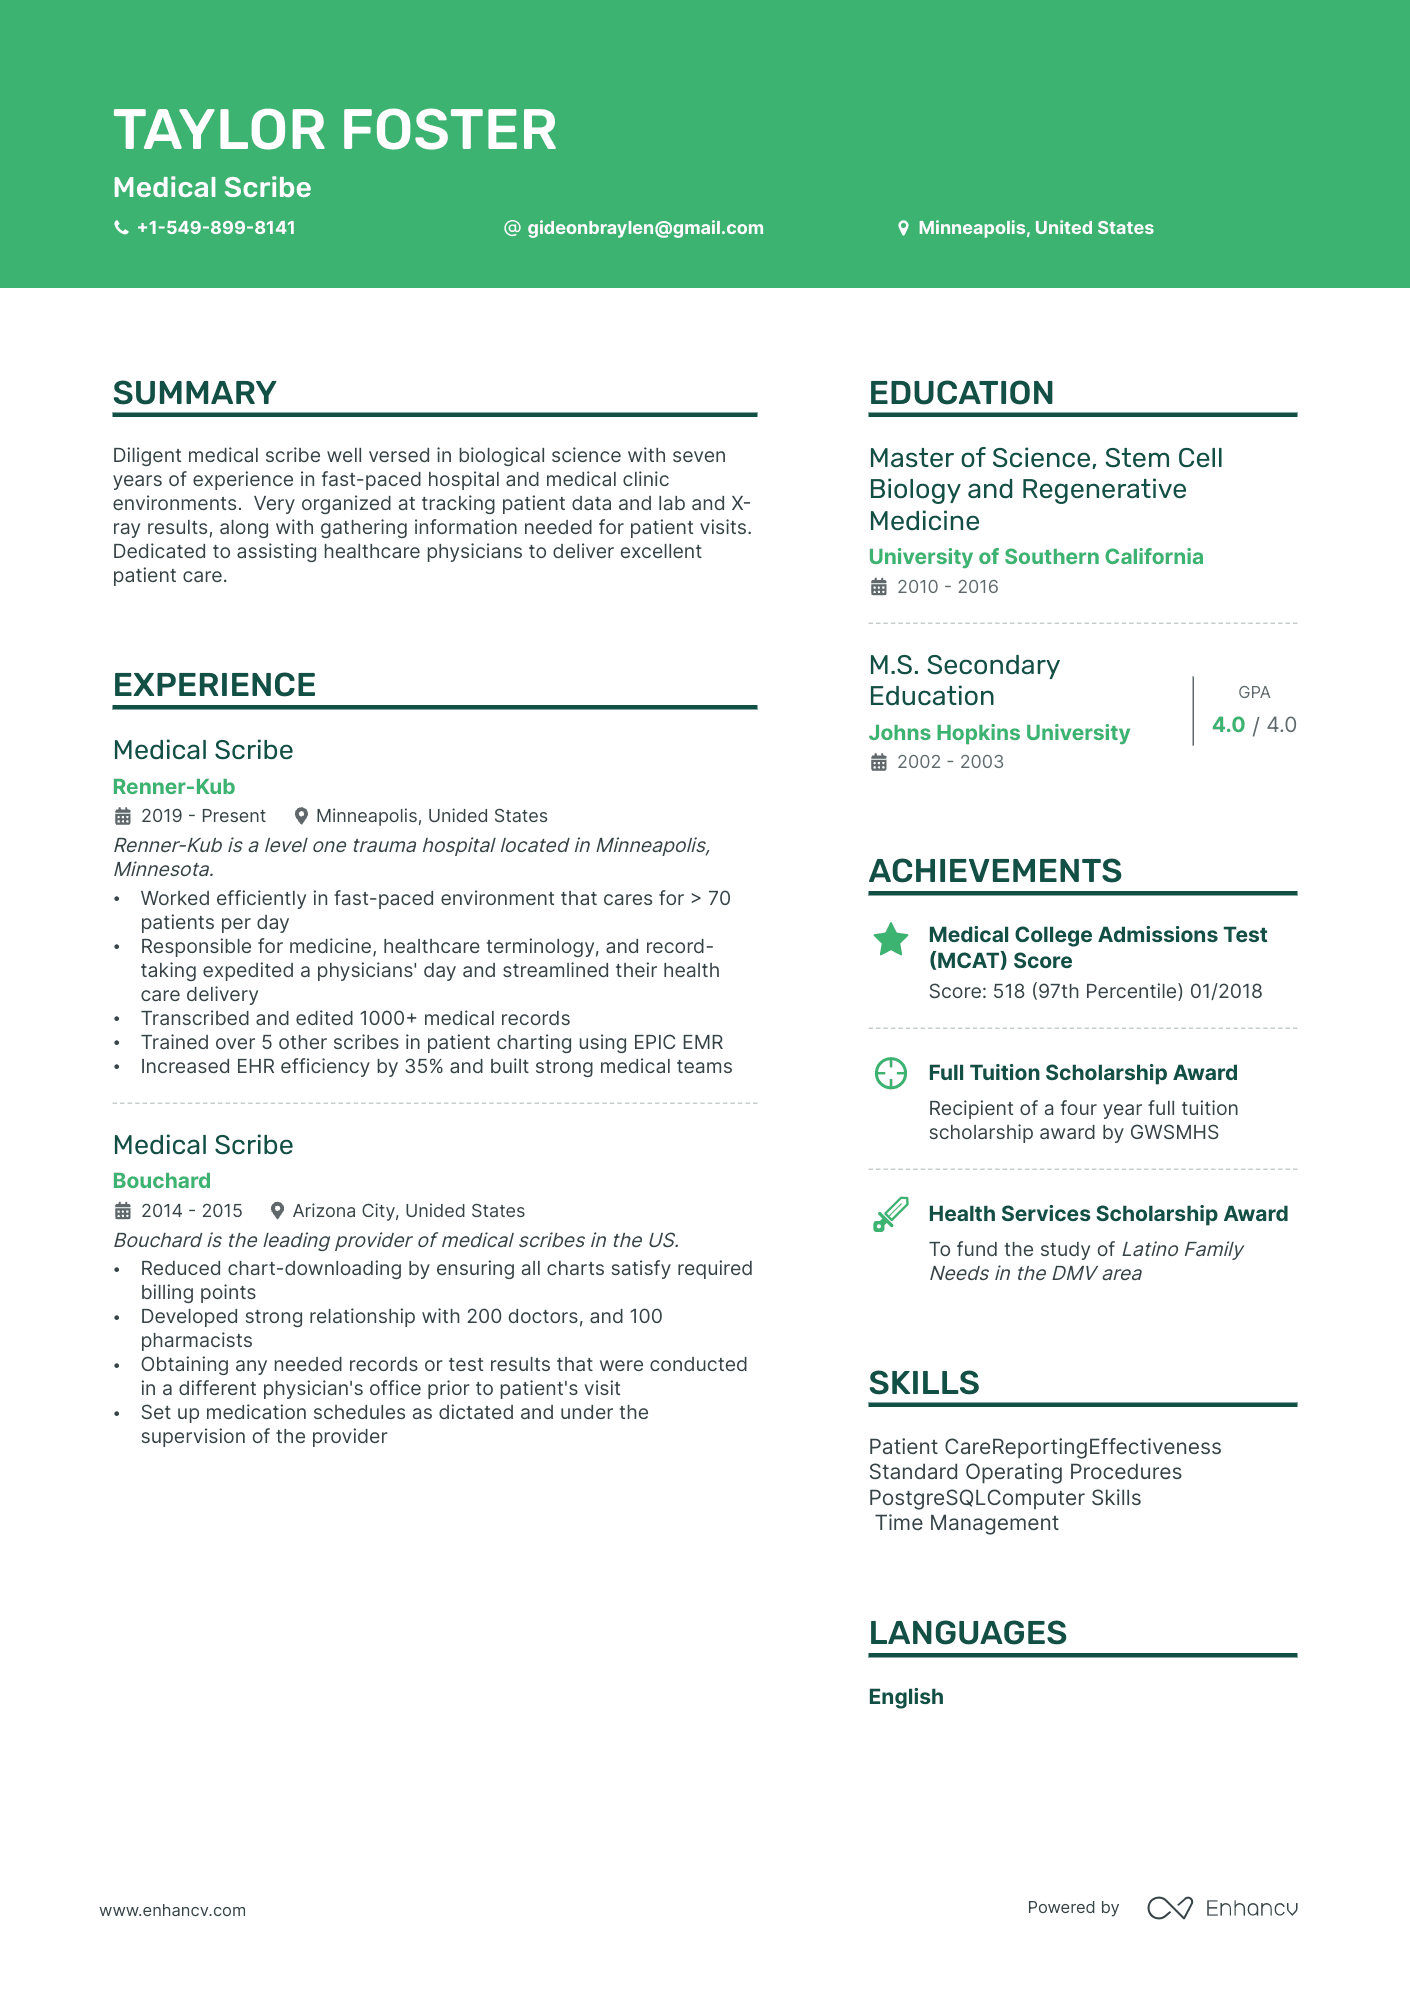 Medical Scribe resume example